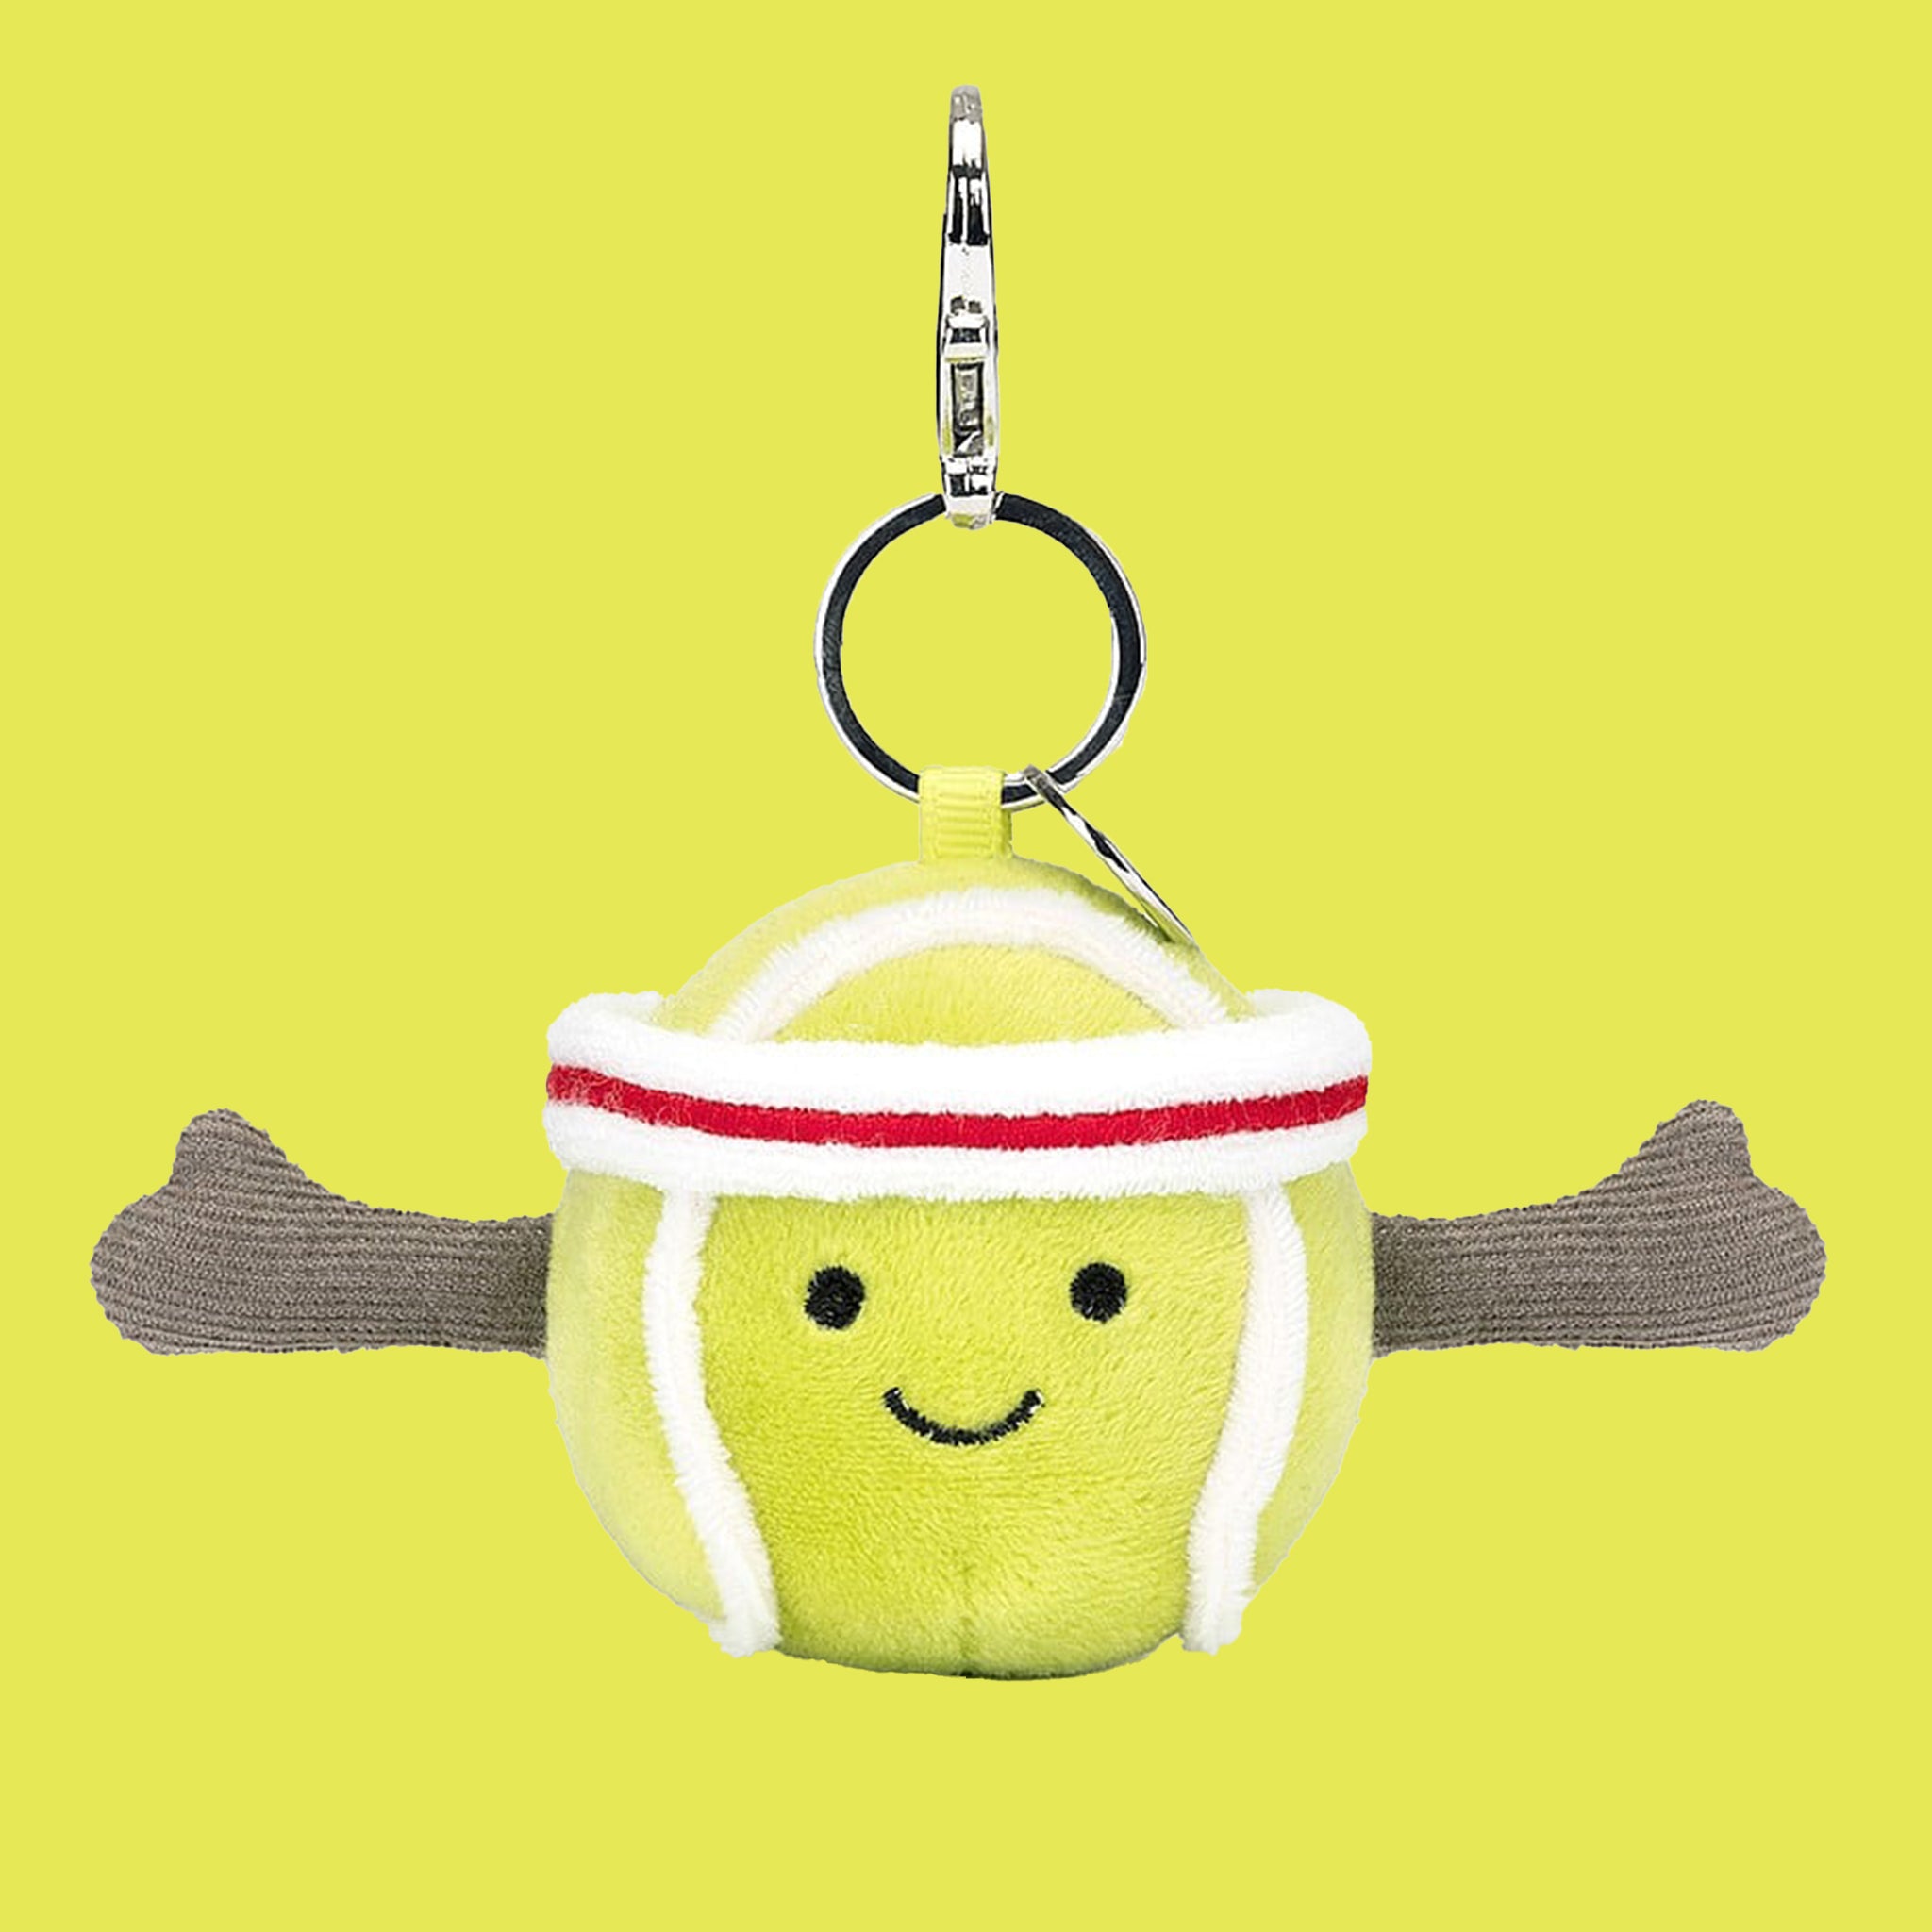 On a green background is a green tennis ball shaped bag charm with a smiling face and a silver loop for attaching. 